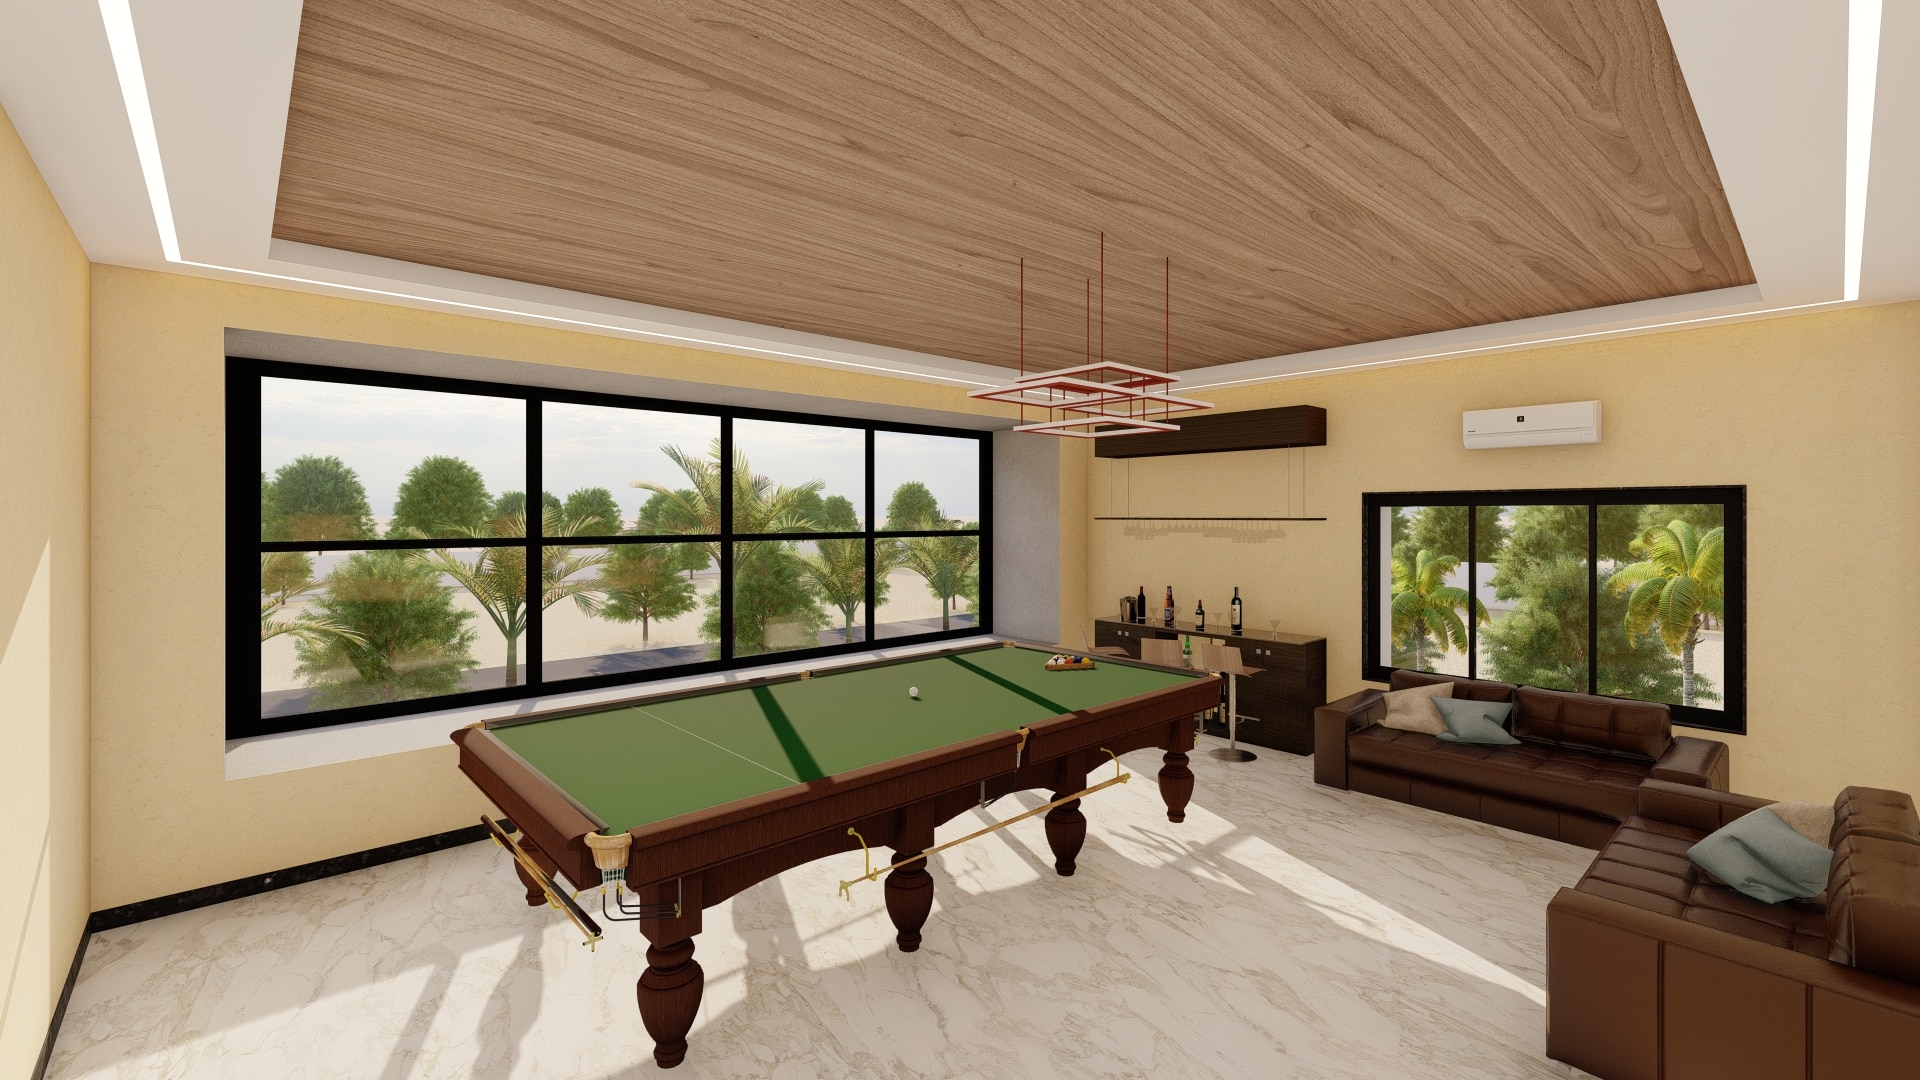 snooker table and drinks counter at holiday home by urban terrace